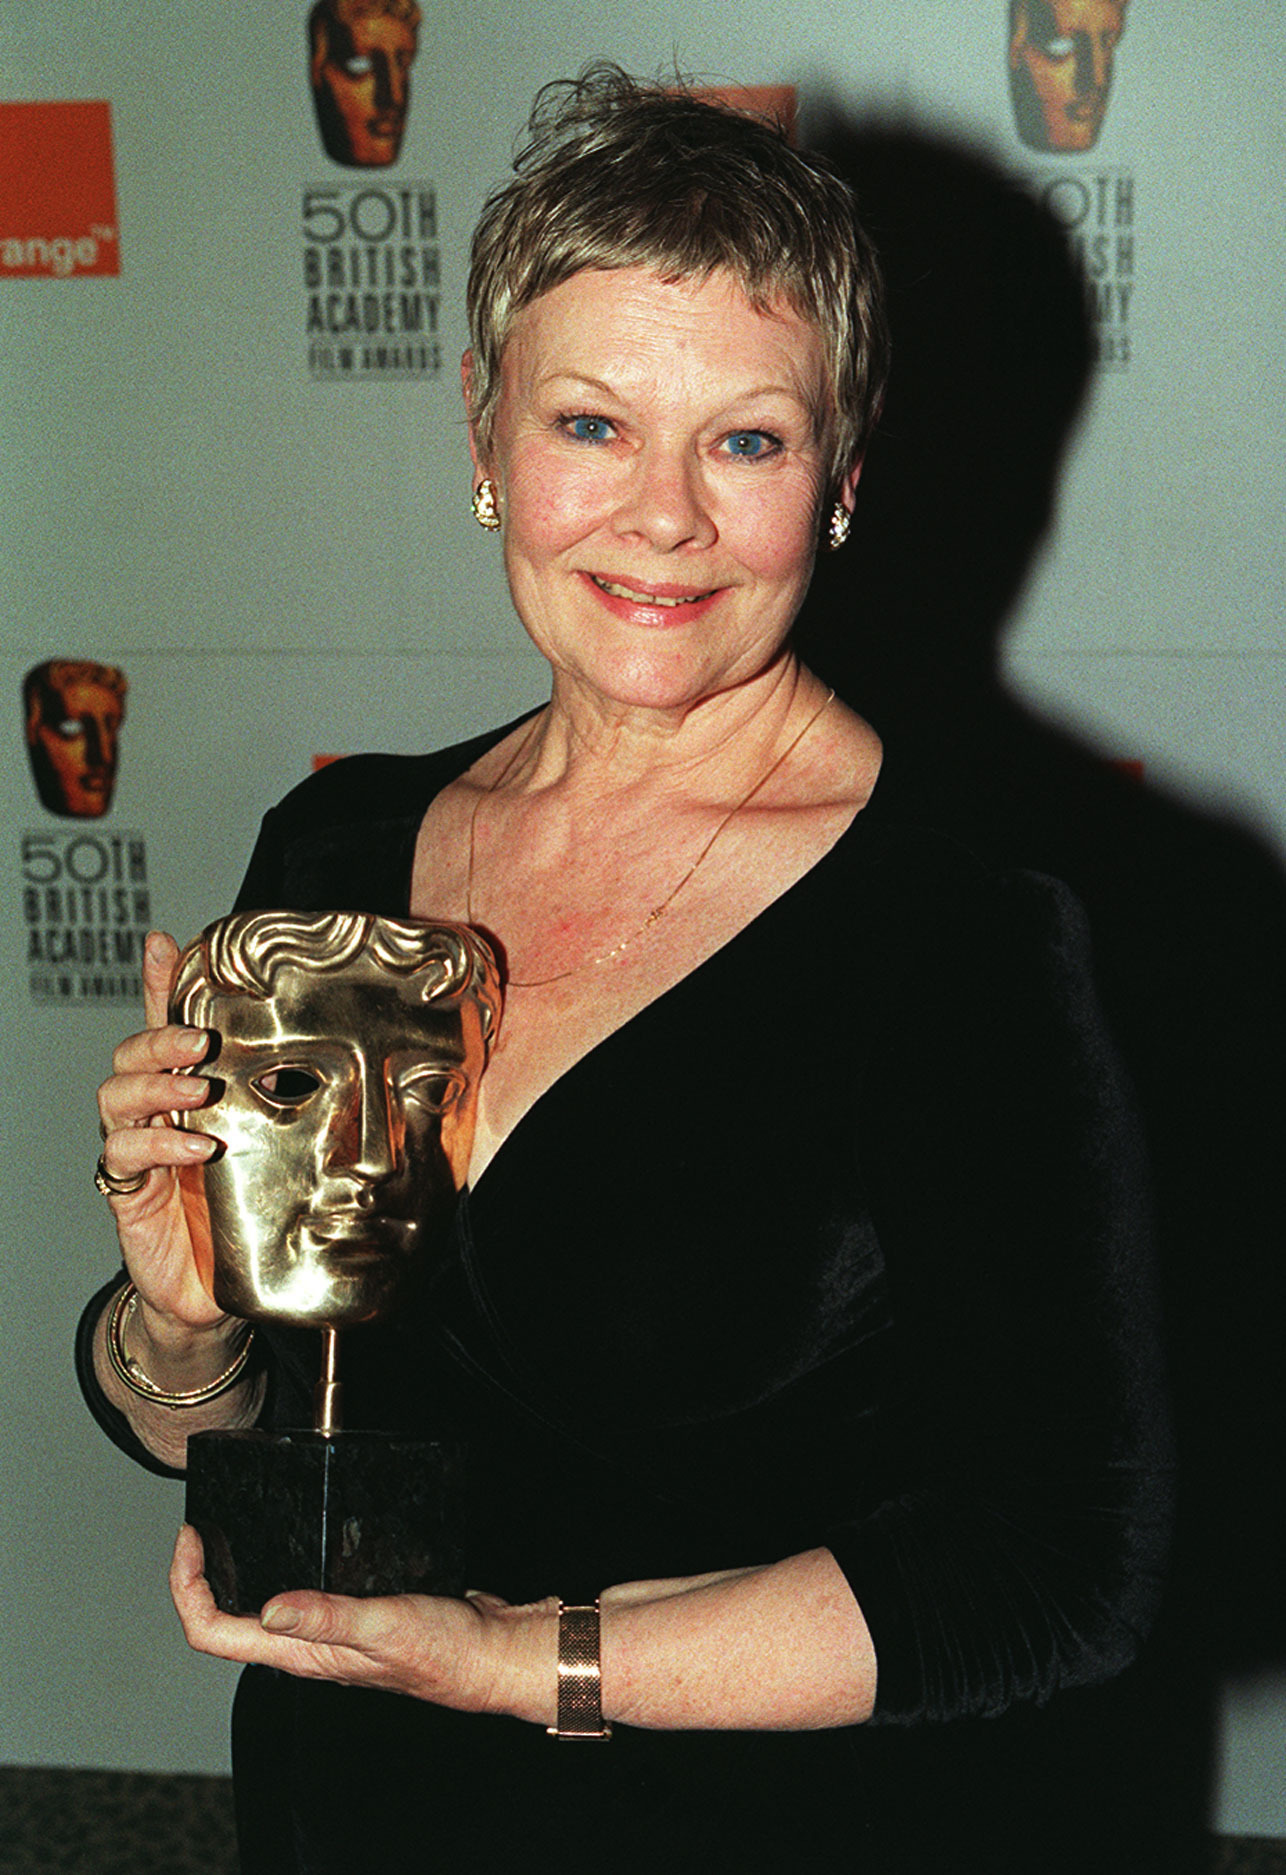 Judi Dench winning the best actress award for Mrs Brown at the 1998 Baftas